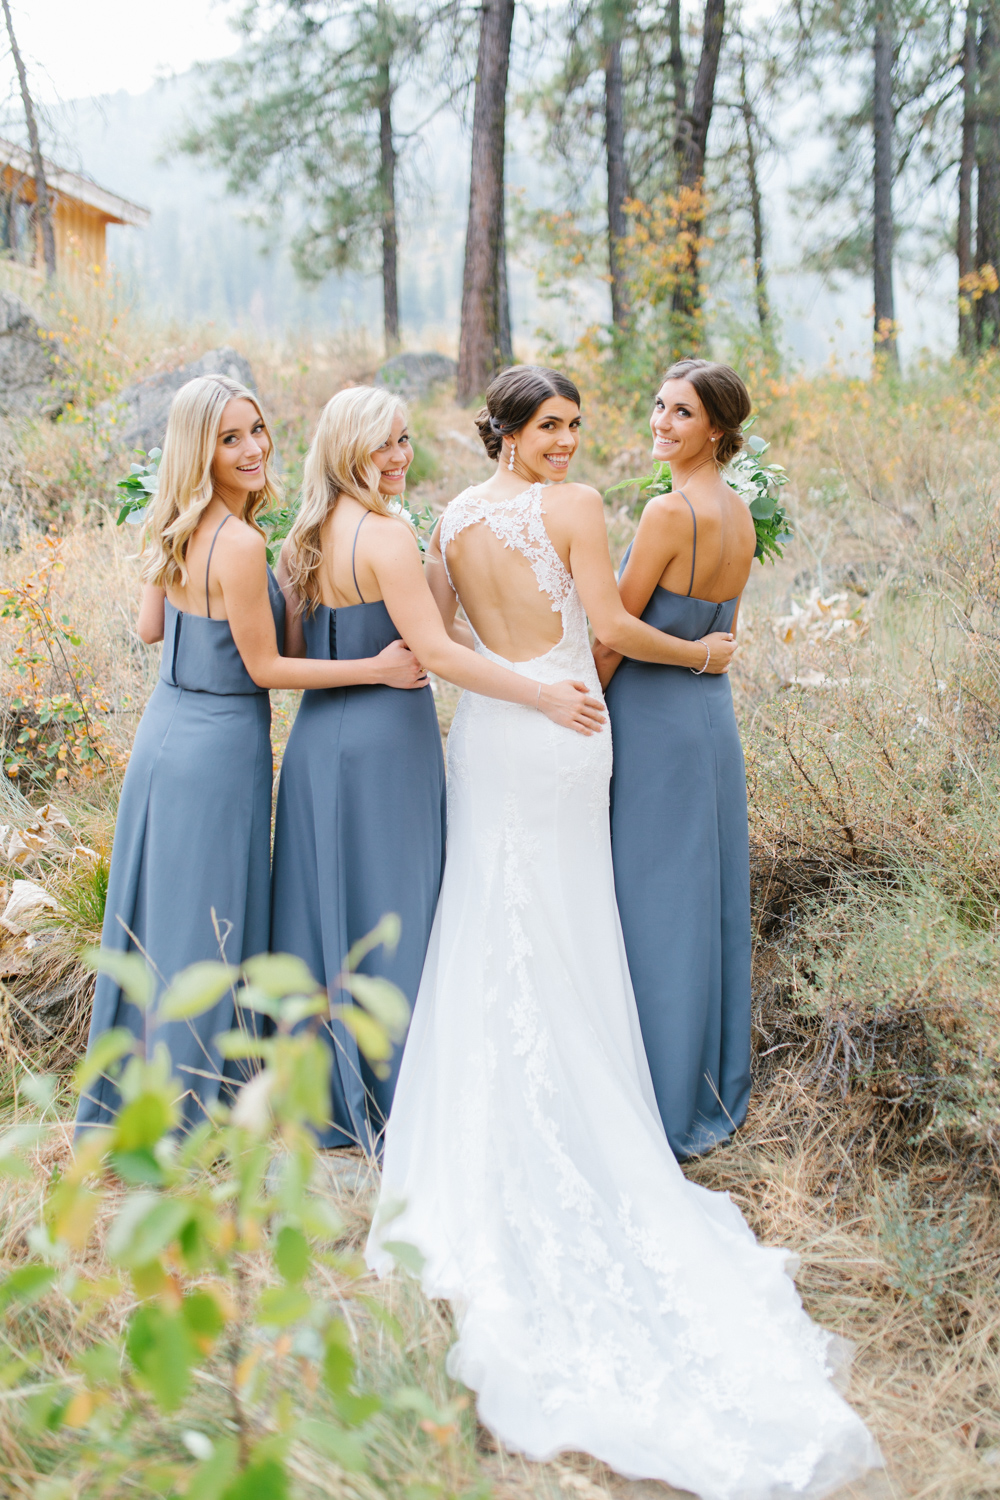 Grey and White Wedding in the Mountains of Leavenworth, Washington | Sleeping Lady | Classic and Timeless Wedding | VSCO | Bride with Bridesmaids | Grey Bridesmaids Dresses.jpg-2239.jpg